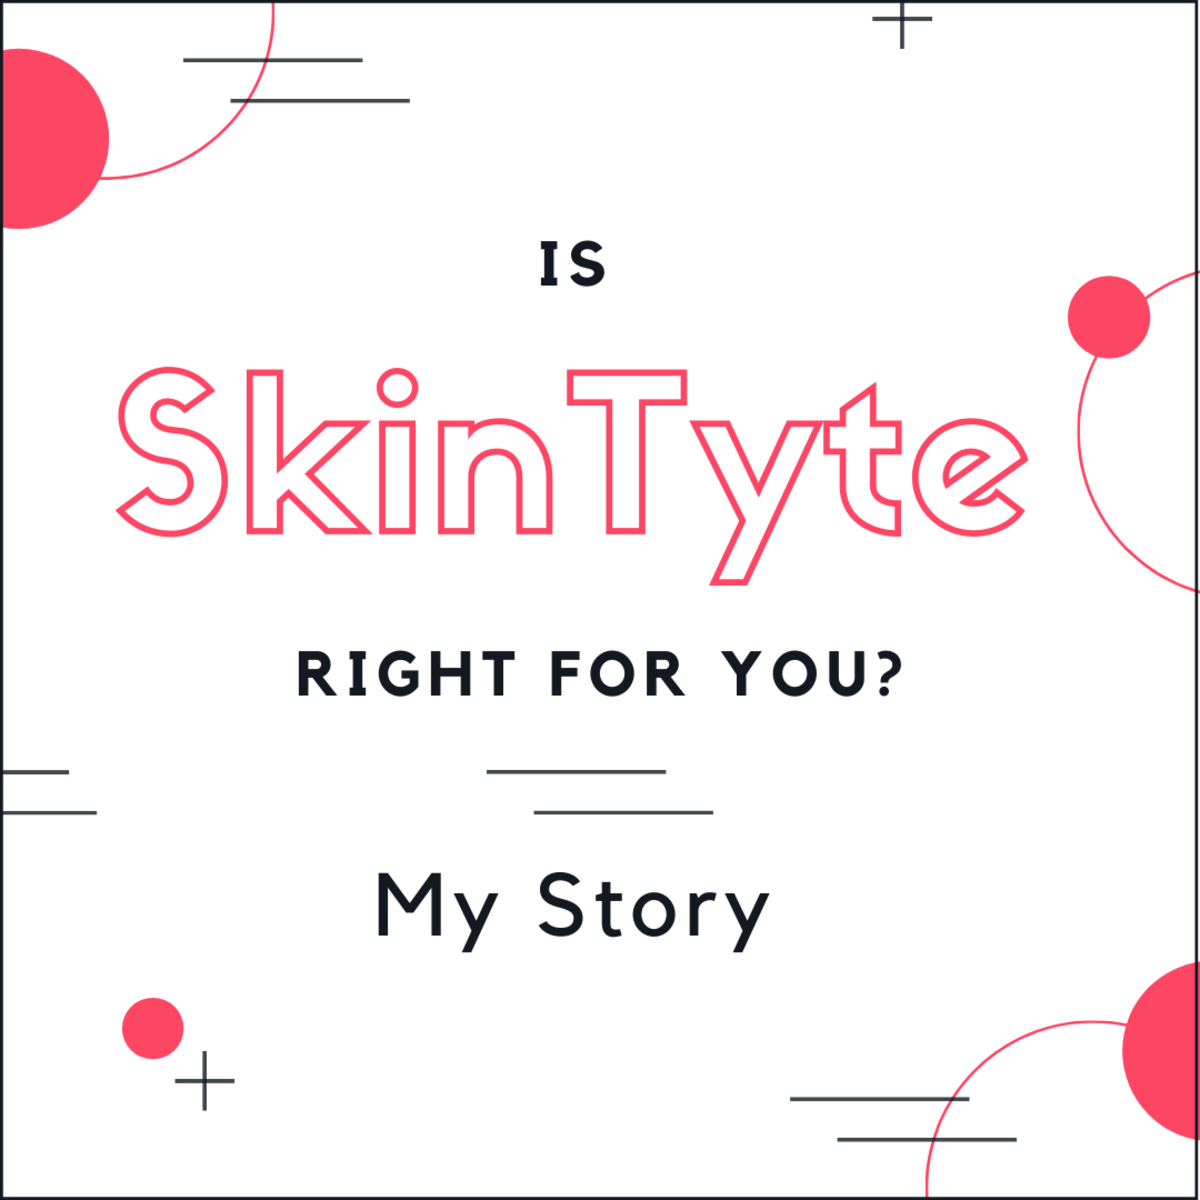 After researching various skin-tightening procedures, I went with SkinTyte—and I'm glad I did. 